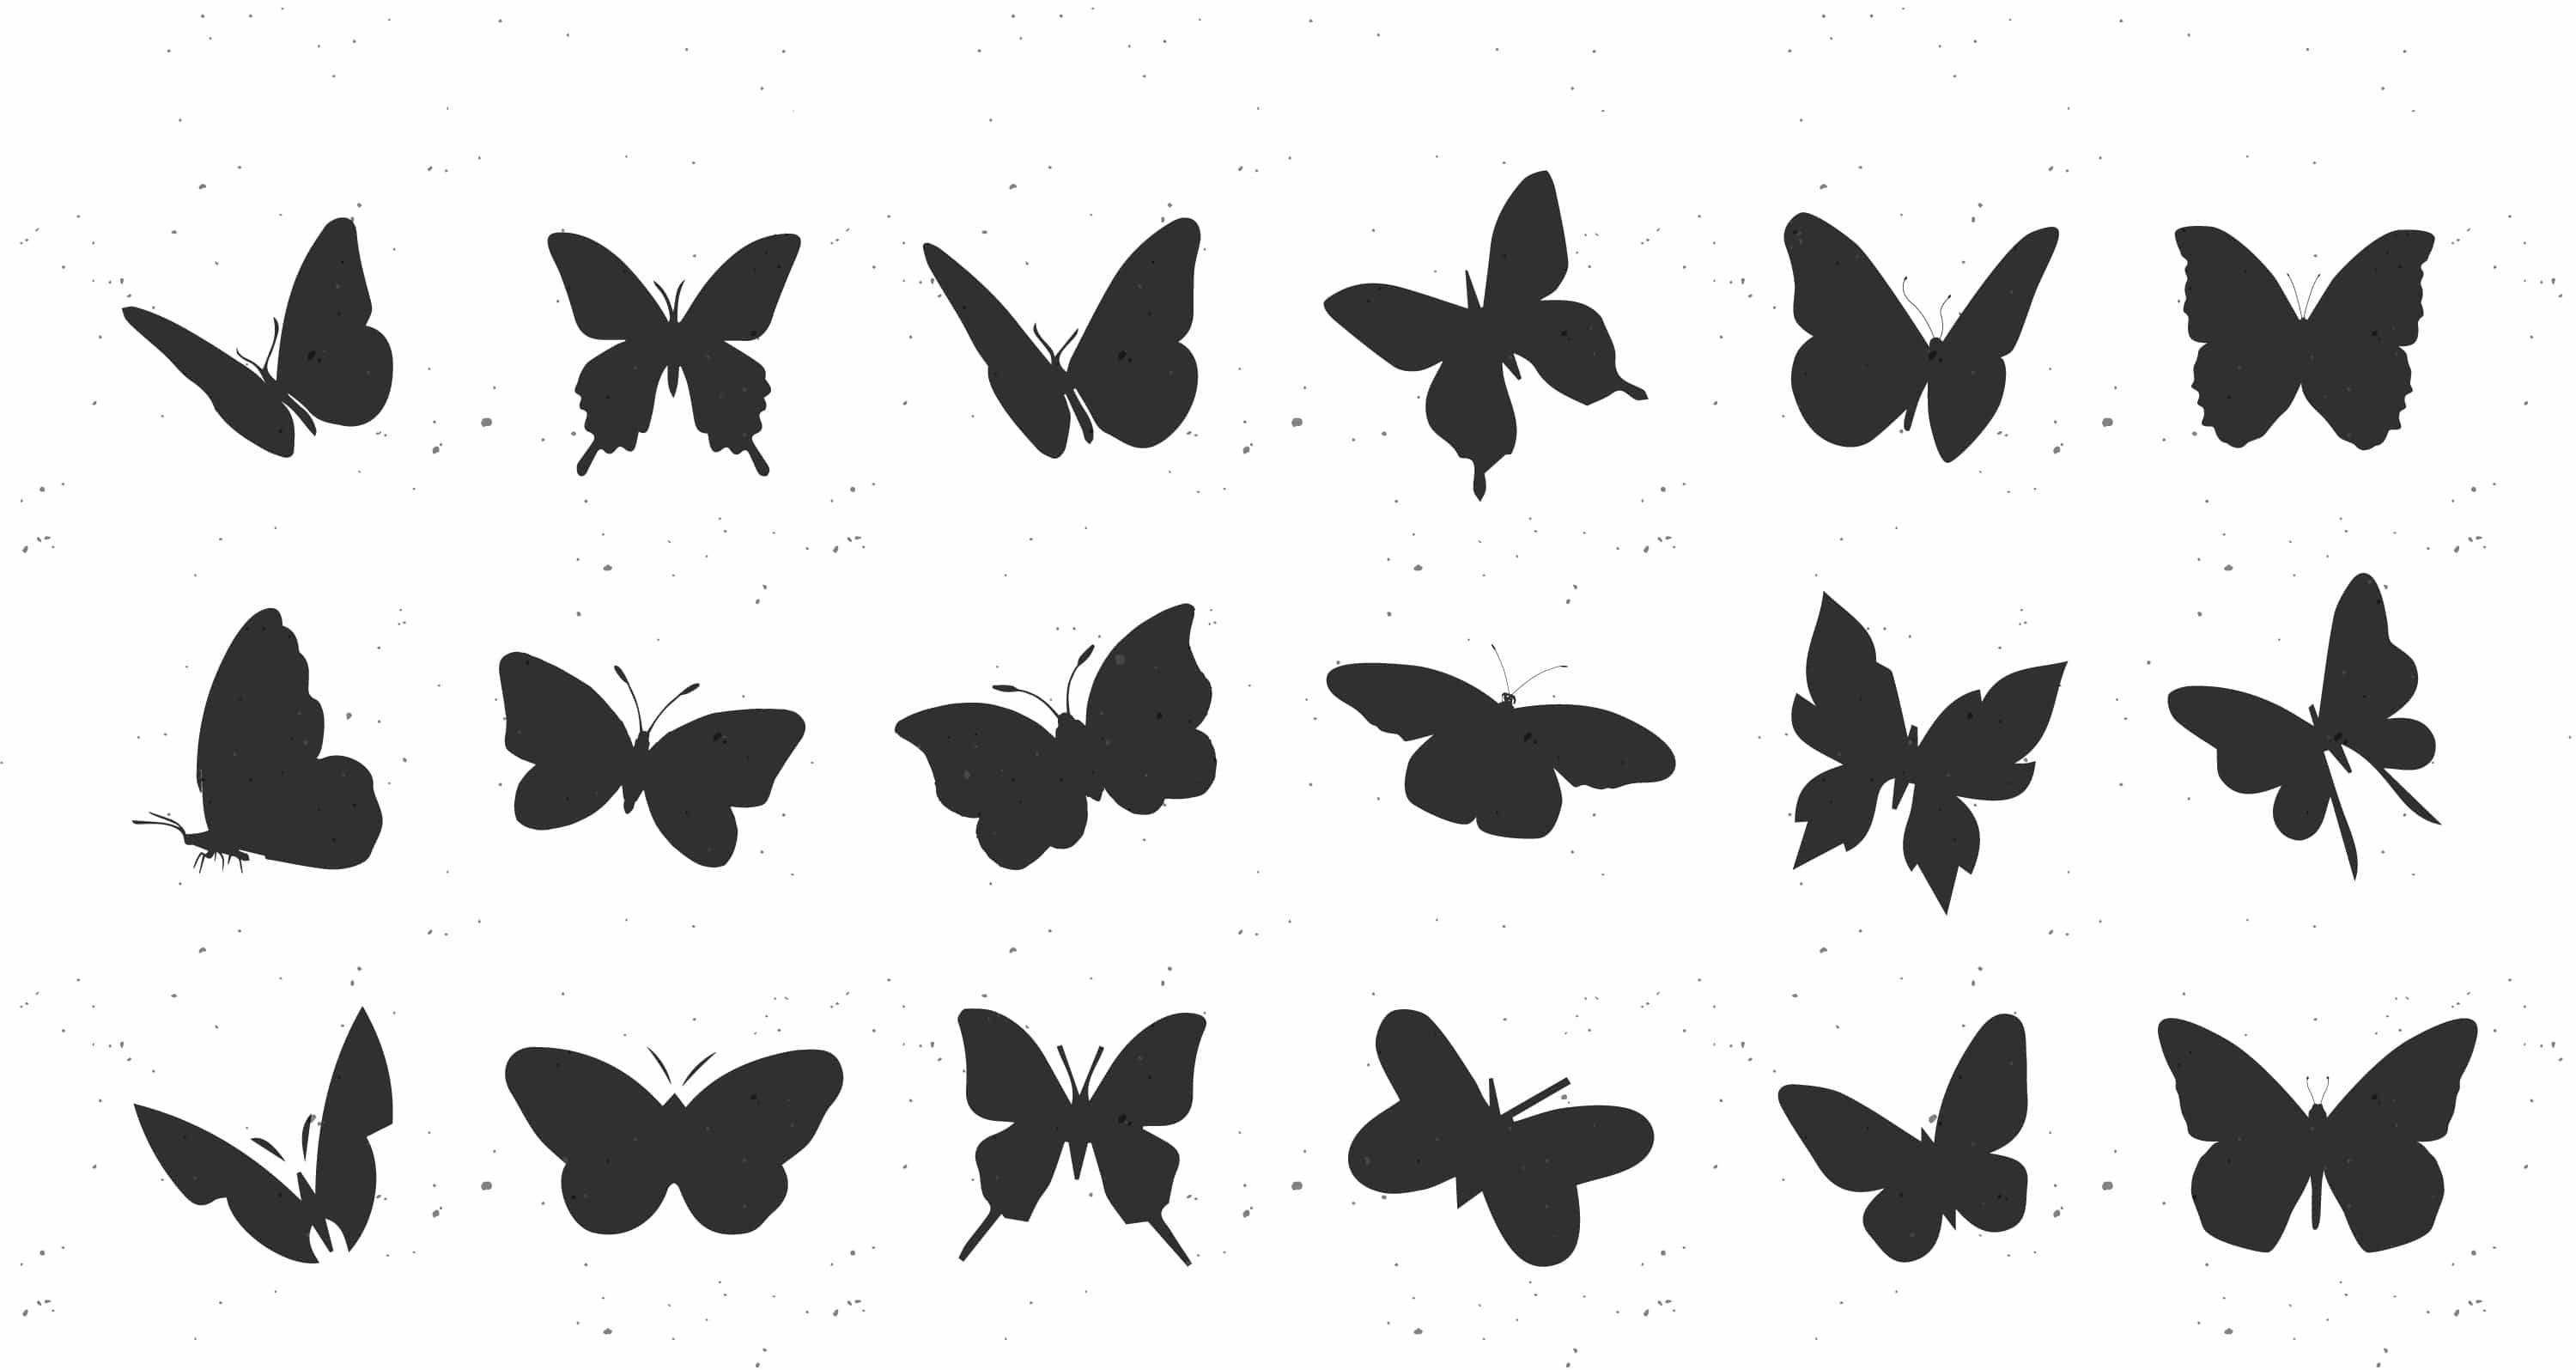 Butterfly Silhouettes Free Vector